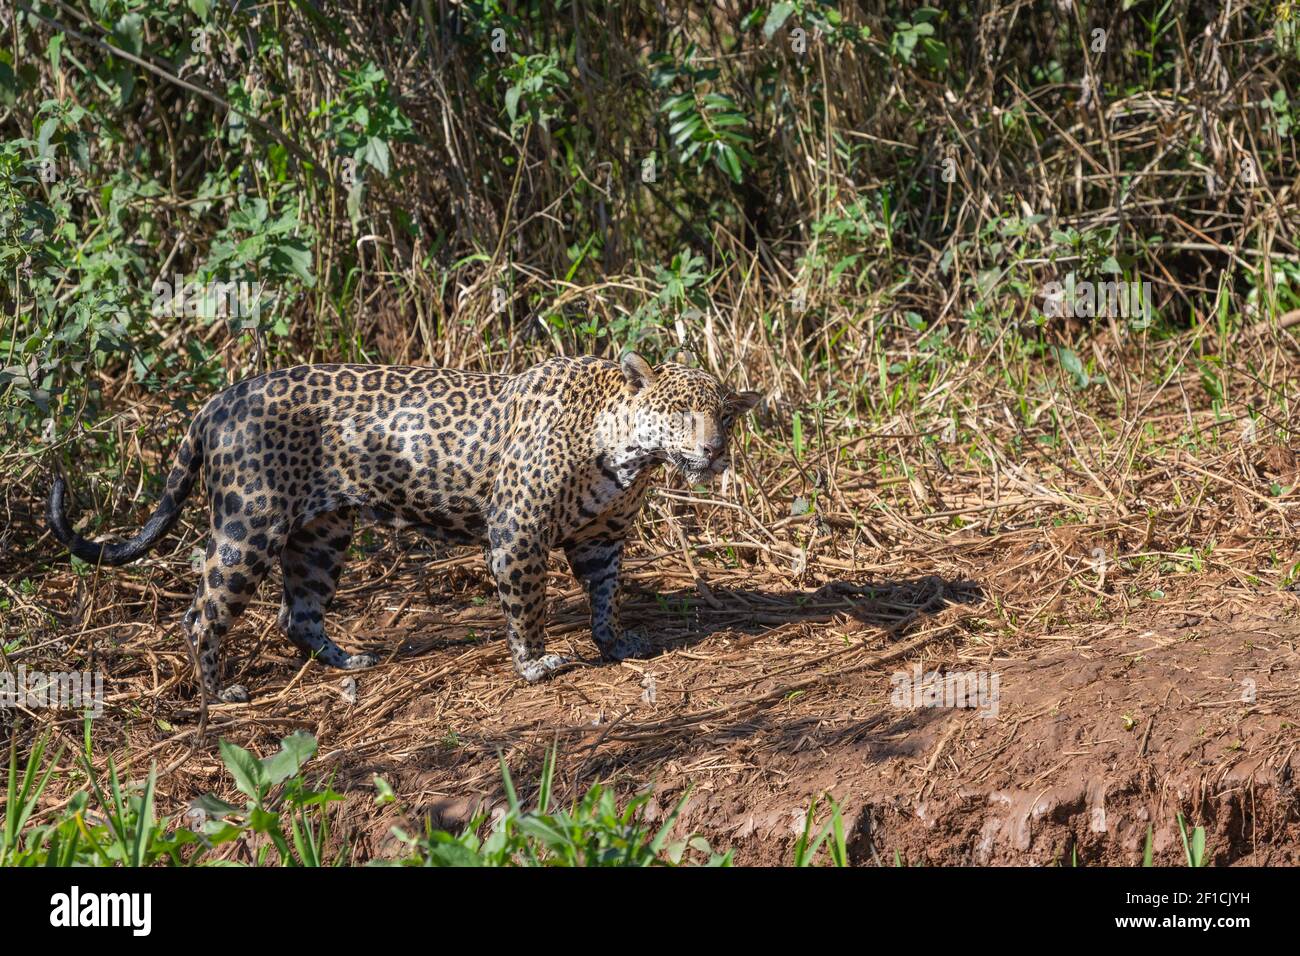 Jaguar (Panthera onca) in the Pantanal in Mato Grosso, Brazil Stock Photo